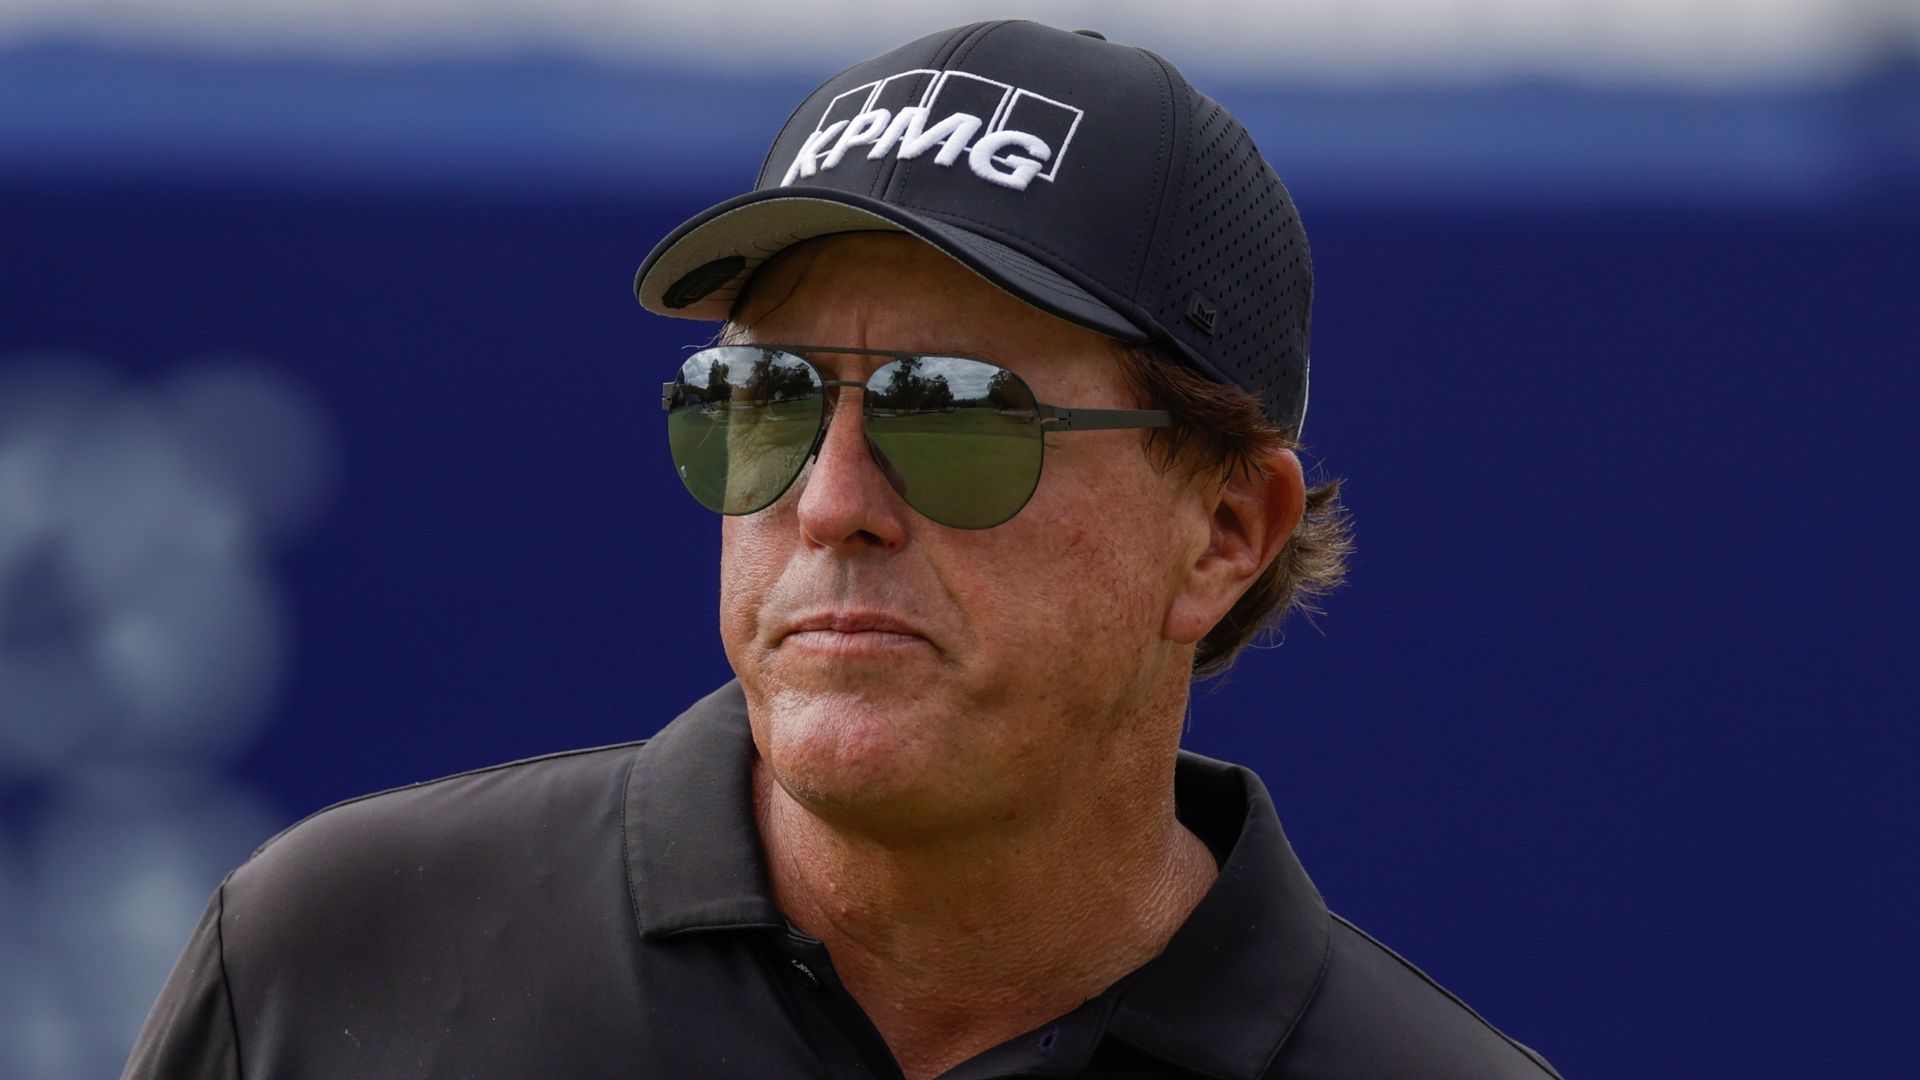 Explained: Why Mickelson and other rebels will play US Open